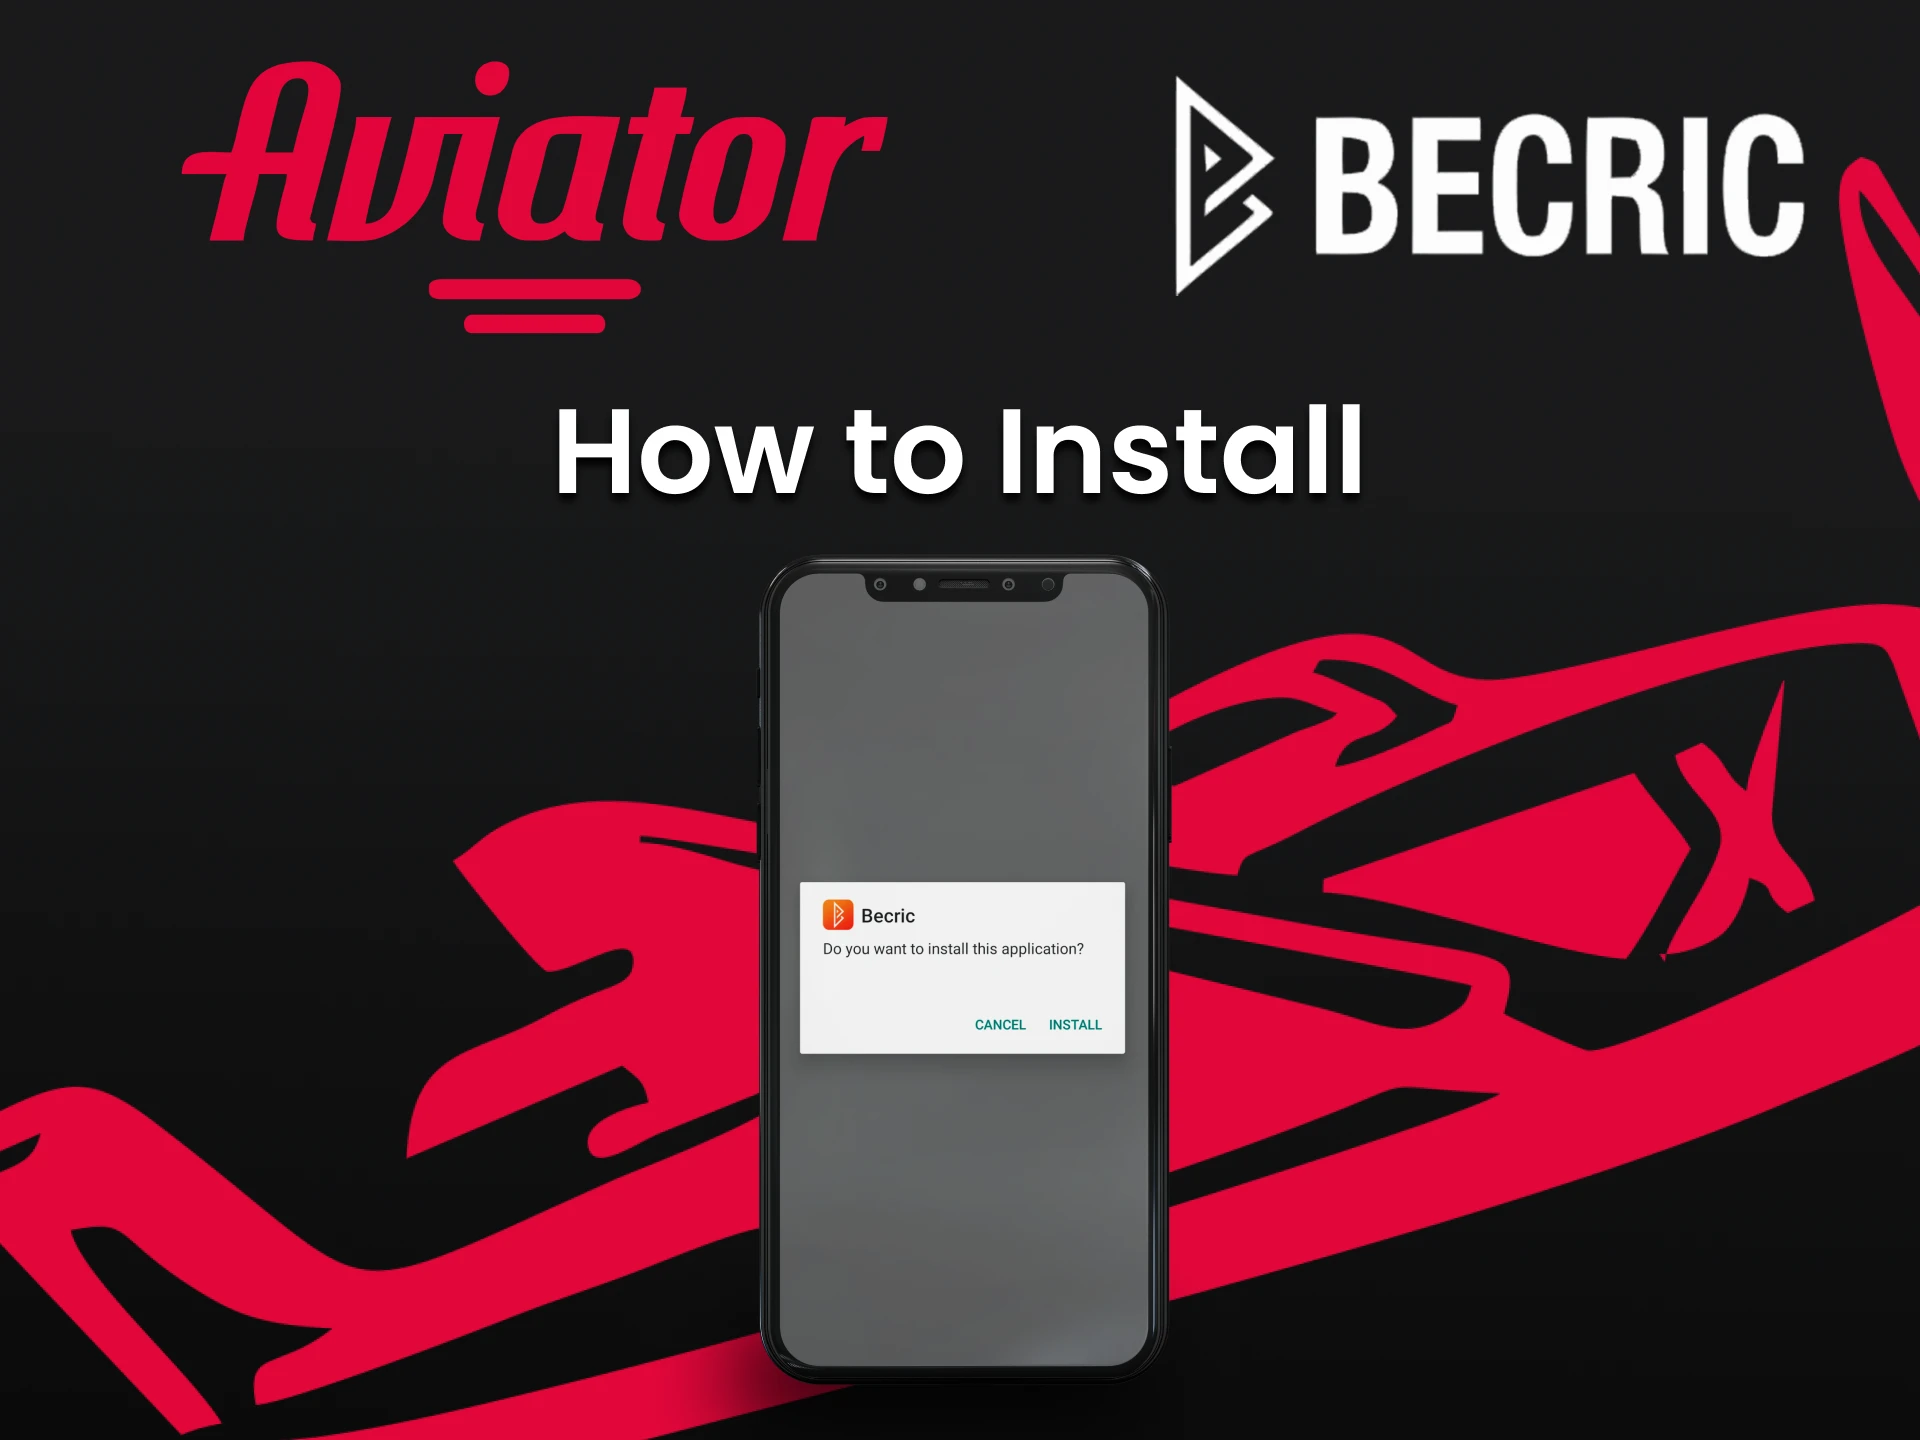 Installing the Becric app is easy.